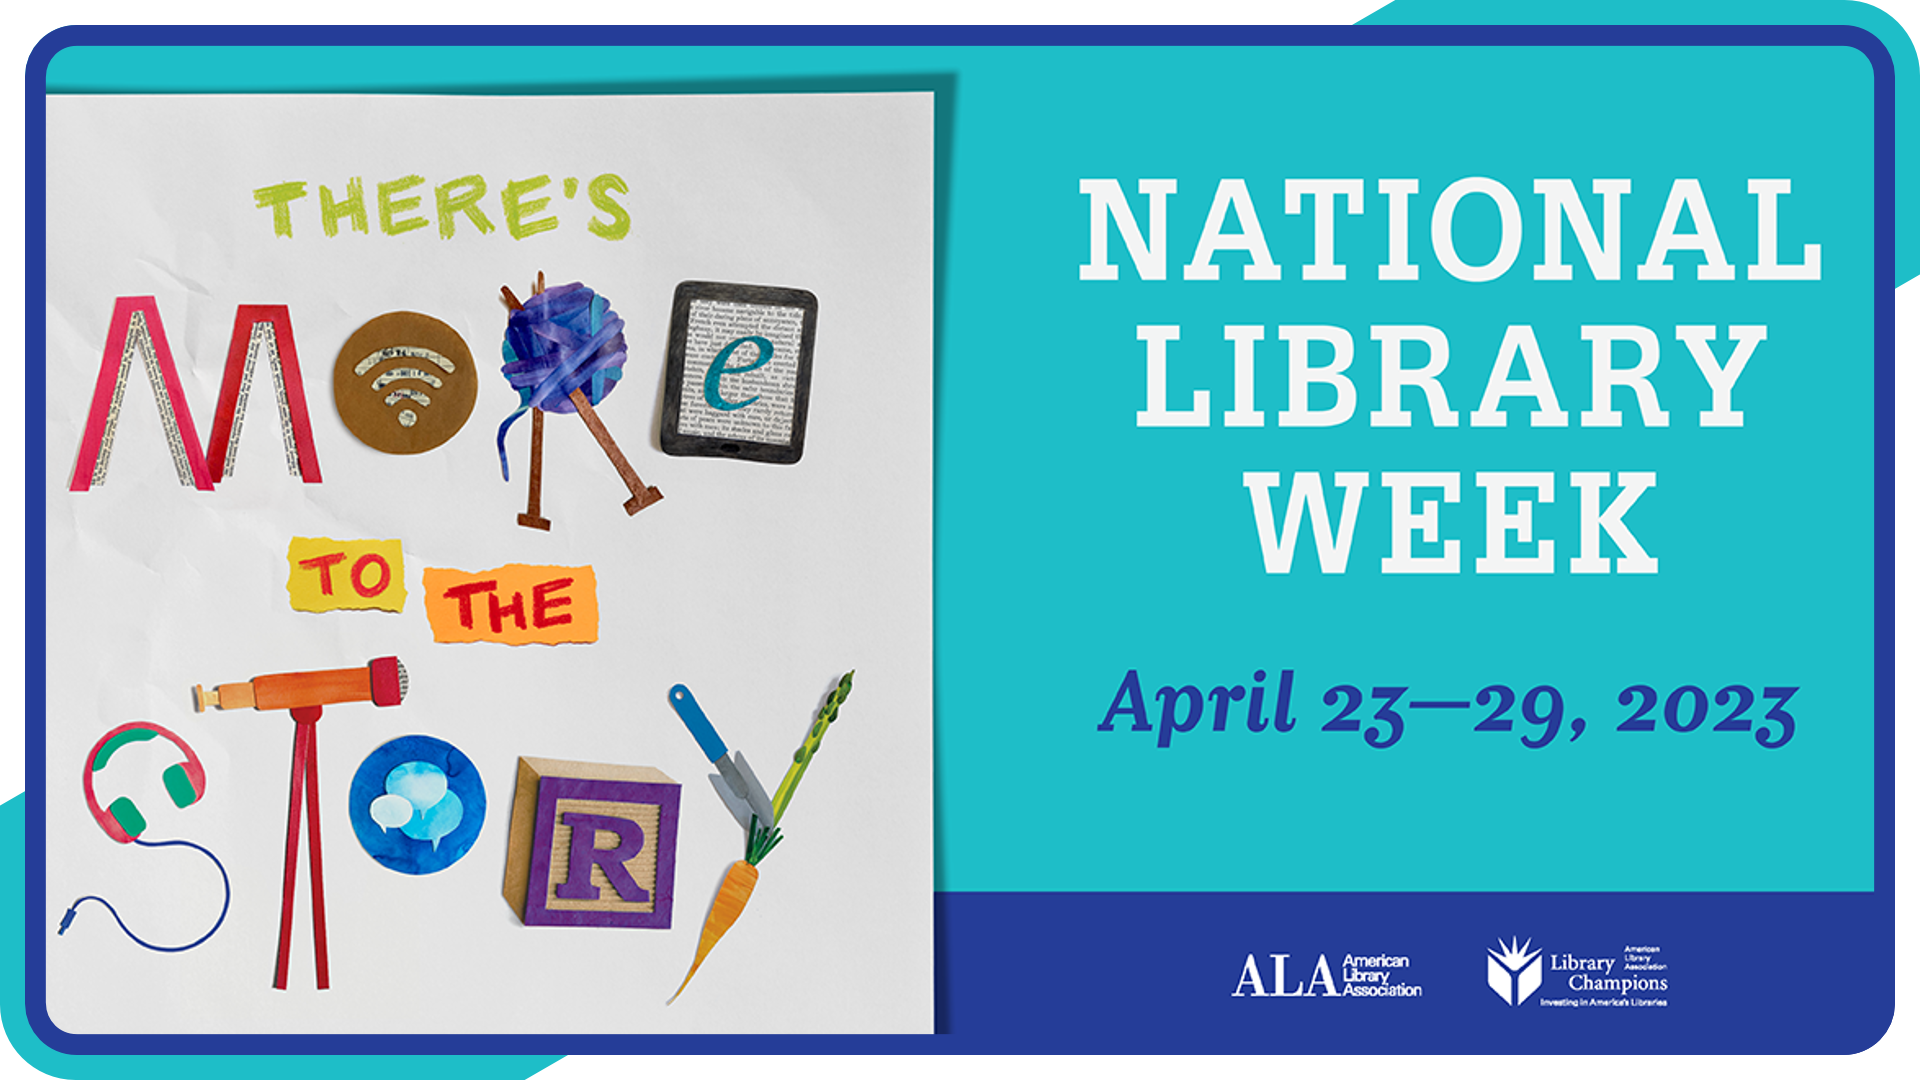 Celebrating National Library Week April 23rd through 29th